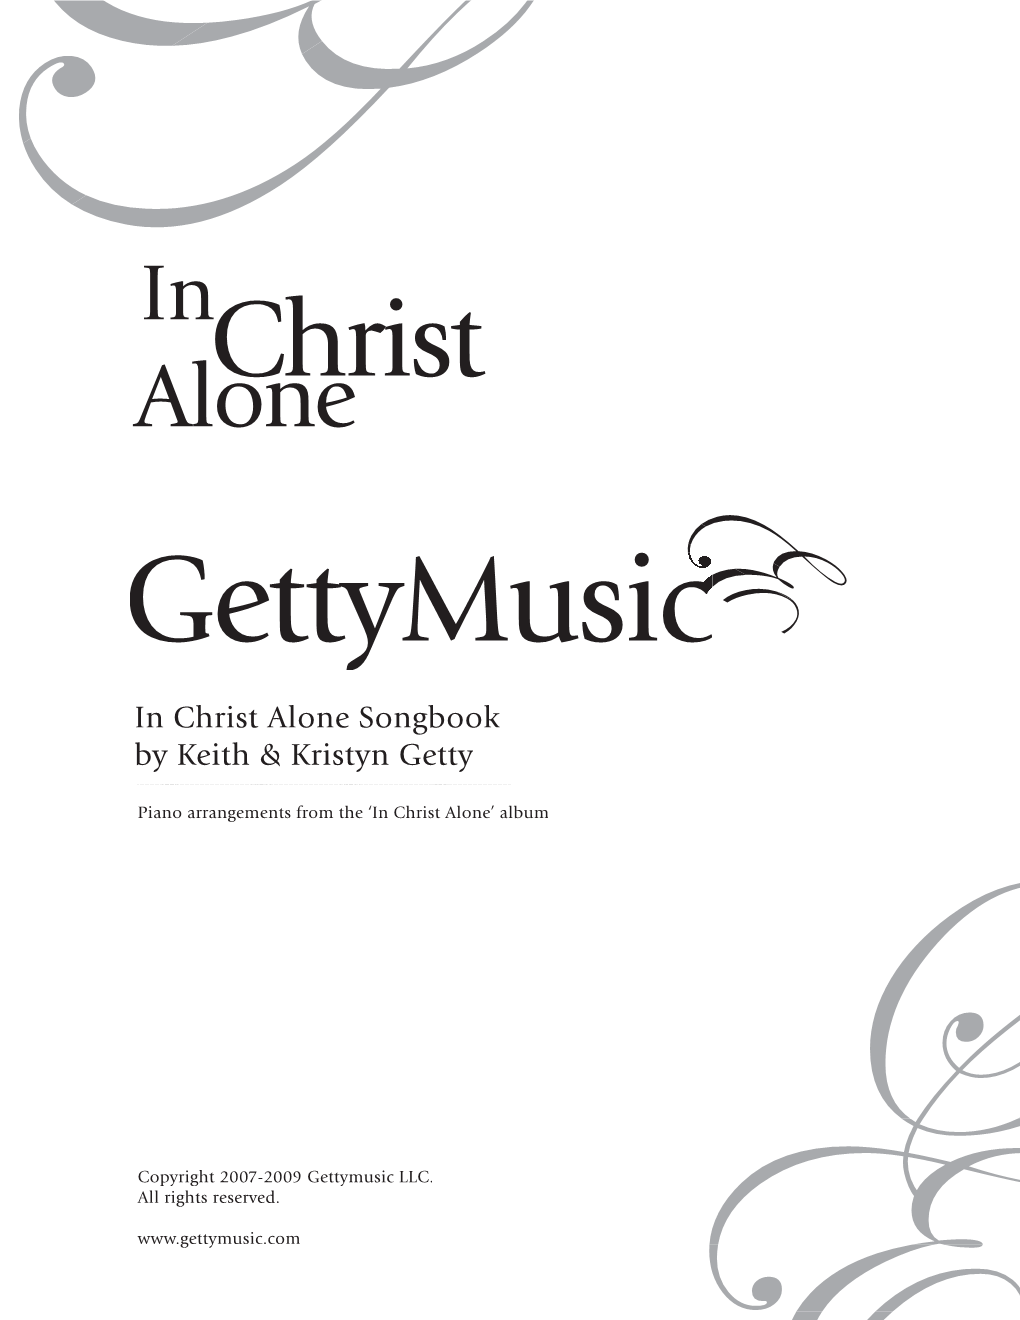 In Christ Alone Songbook by Keith & Kristyn Getty